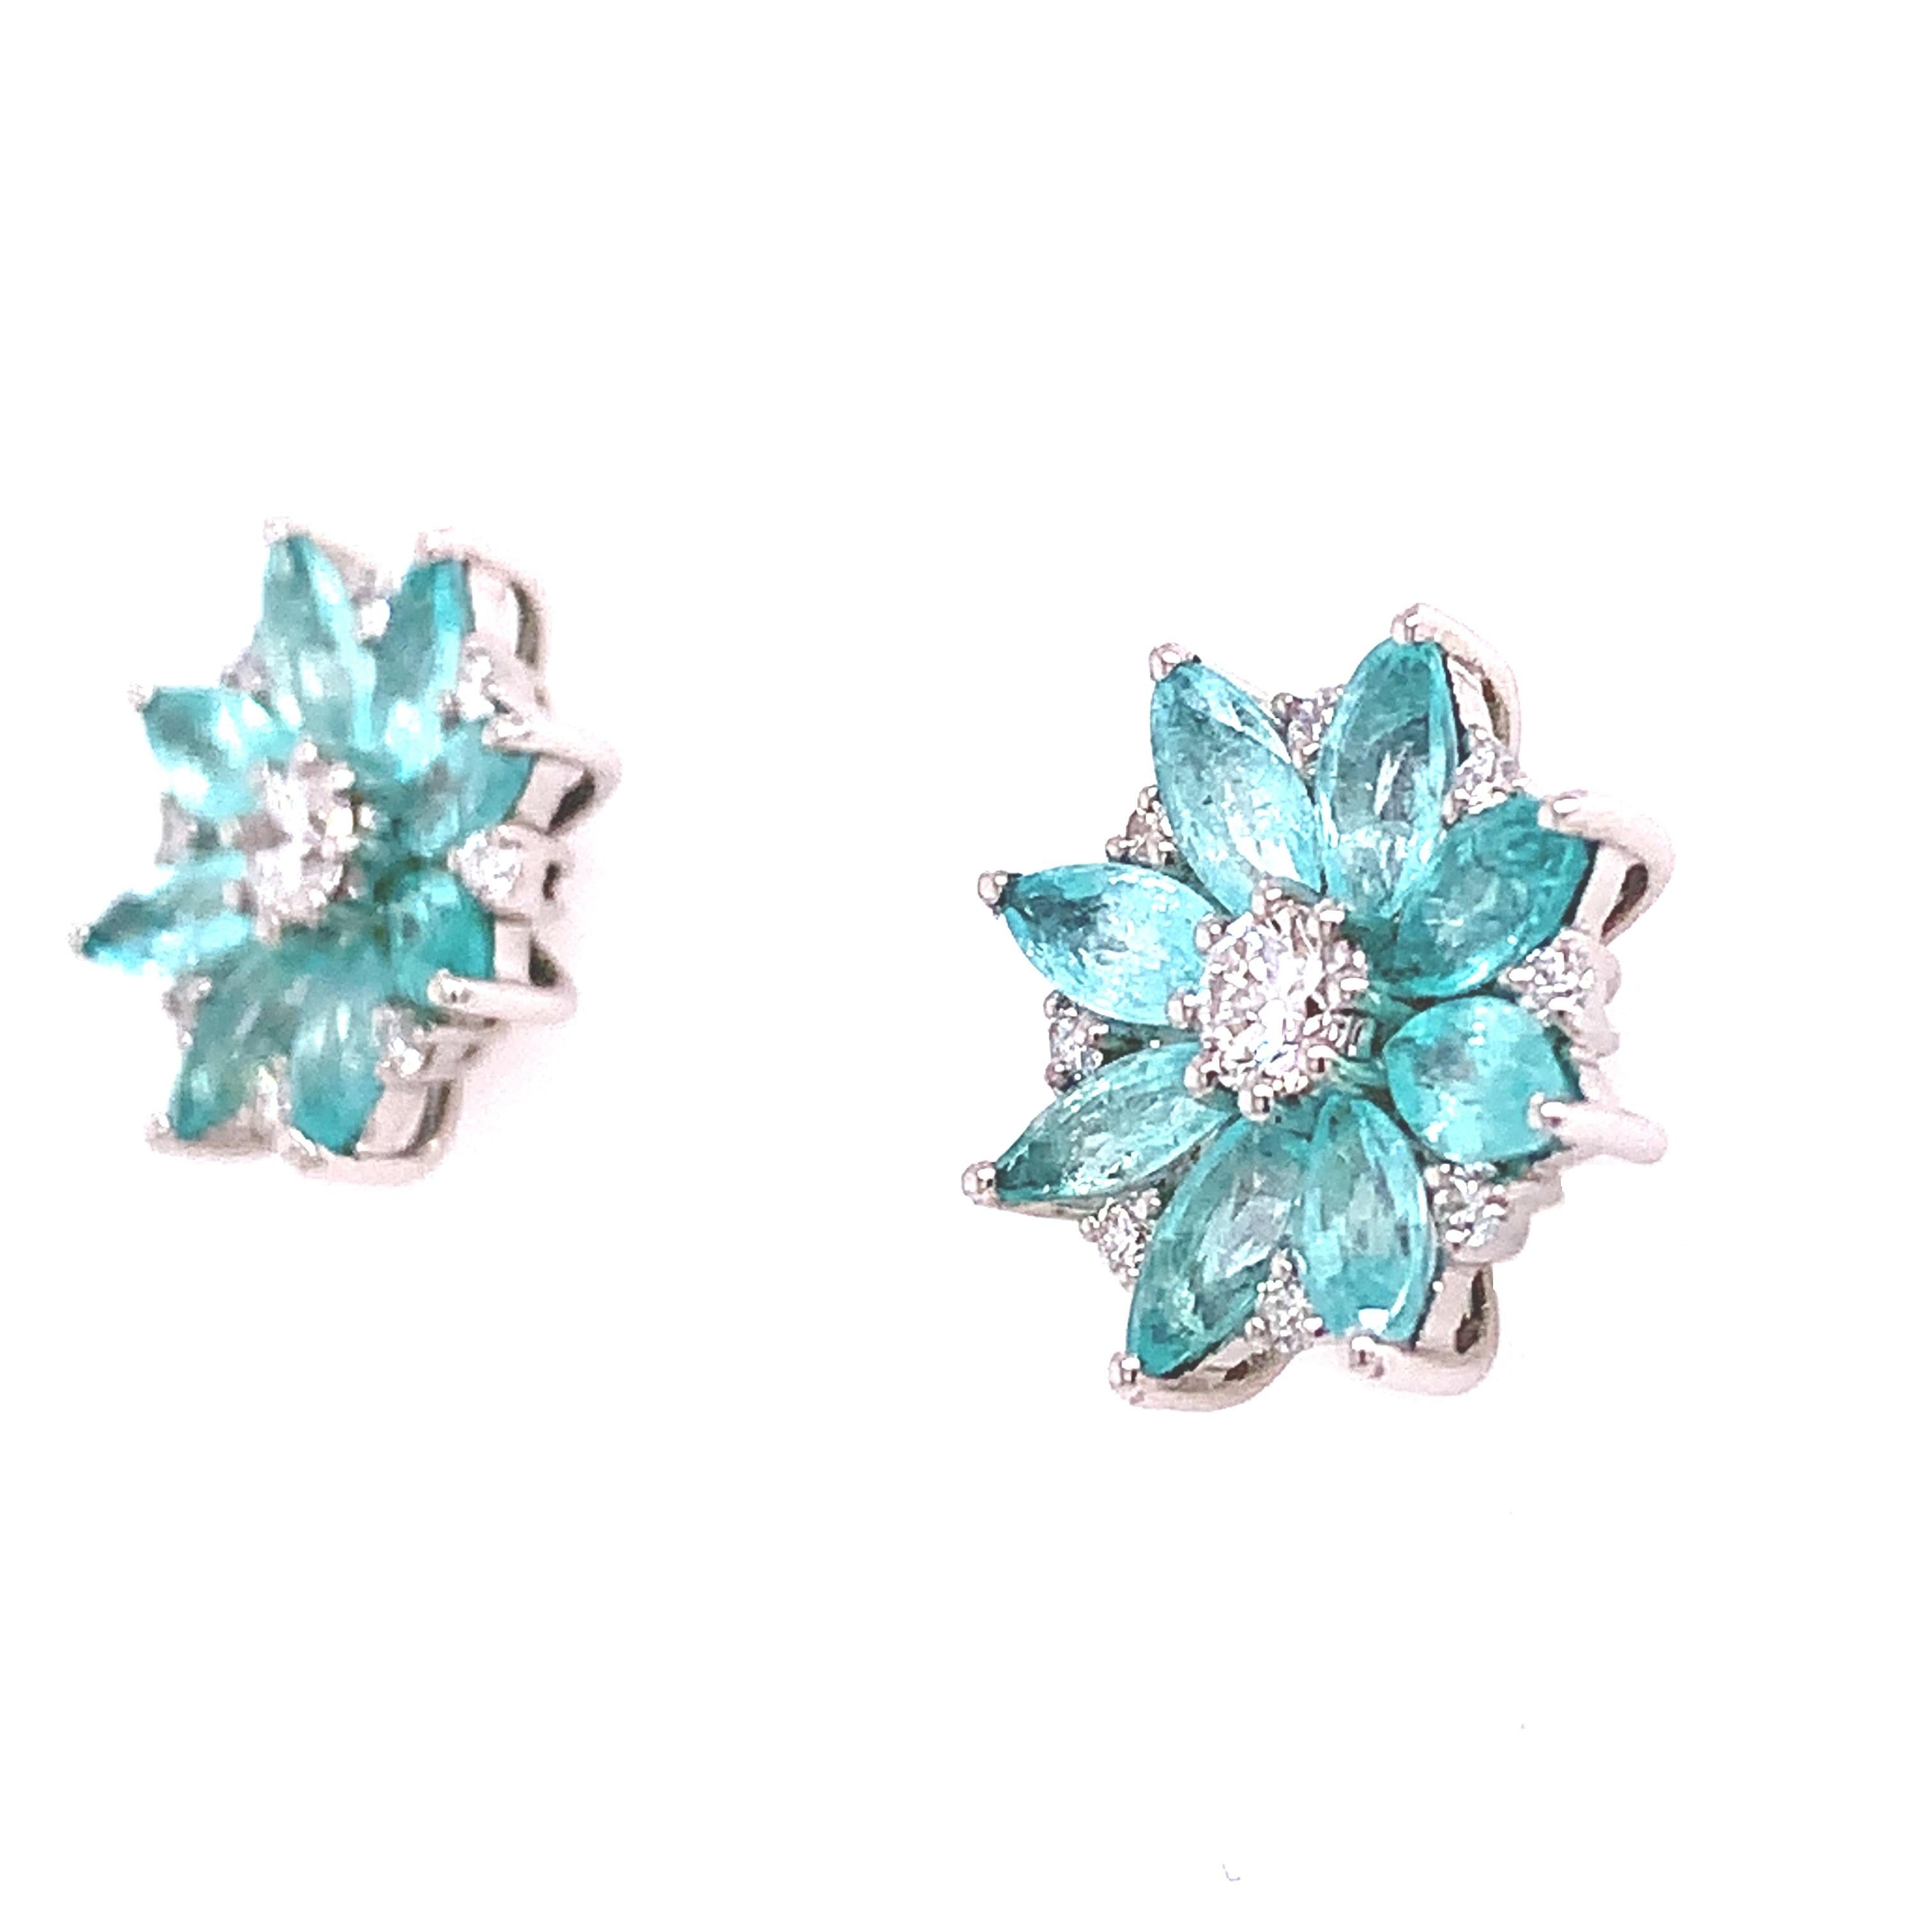 Exclusive Collection

Sparkling with the eternal glow of nature's most magnificent creation, the flower stud earrings have radiant Paraiba petals totaling 2.06 carats arranged around a brilliant Diamond center